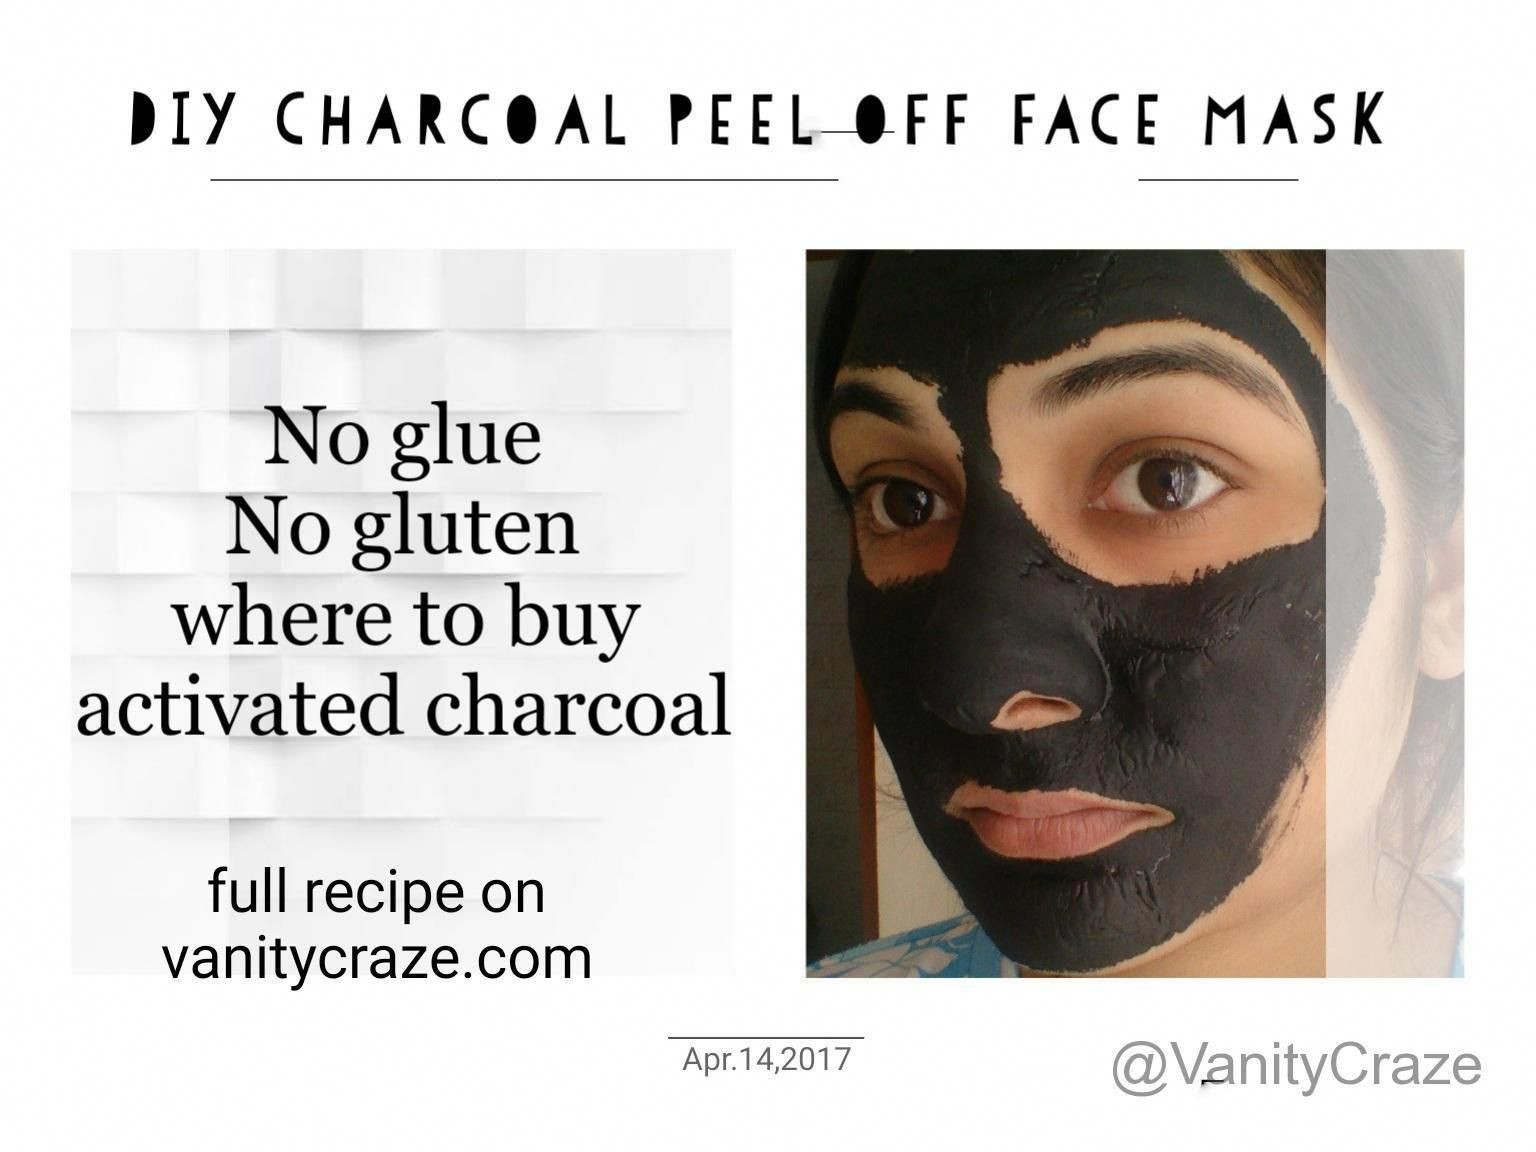 DIY Charcoal Peel Off Mask Without Glue
 DIY Charcoal peel off face mask diyfacemasksforblackheads